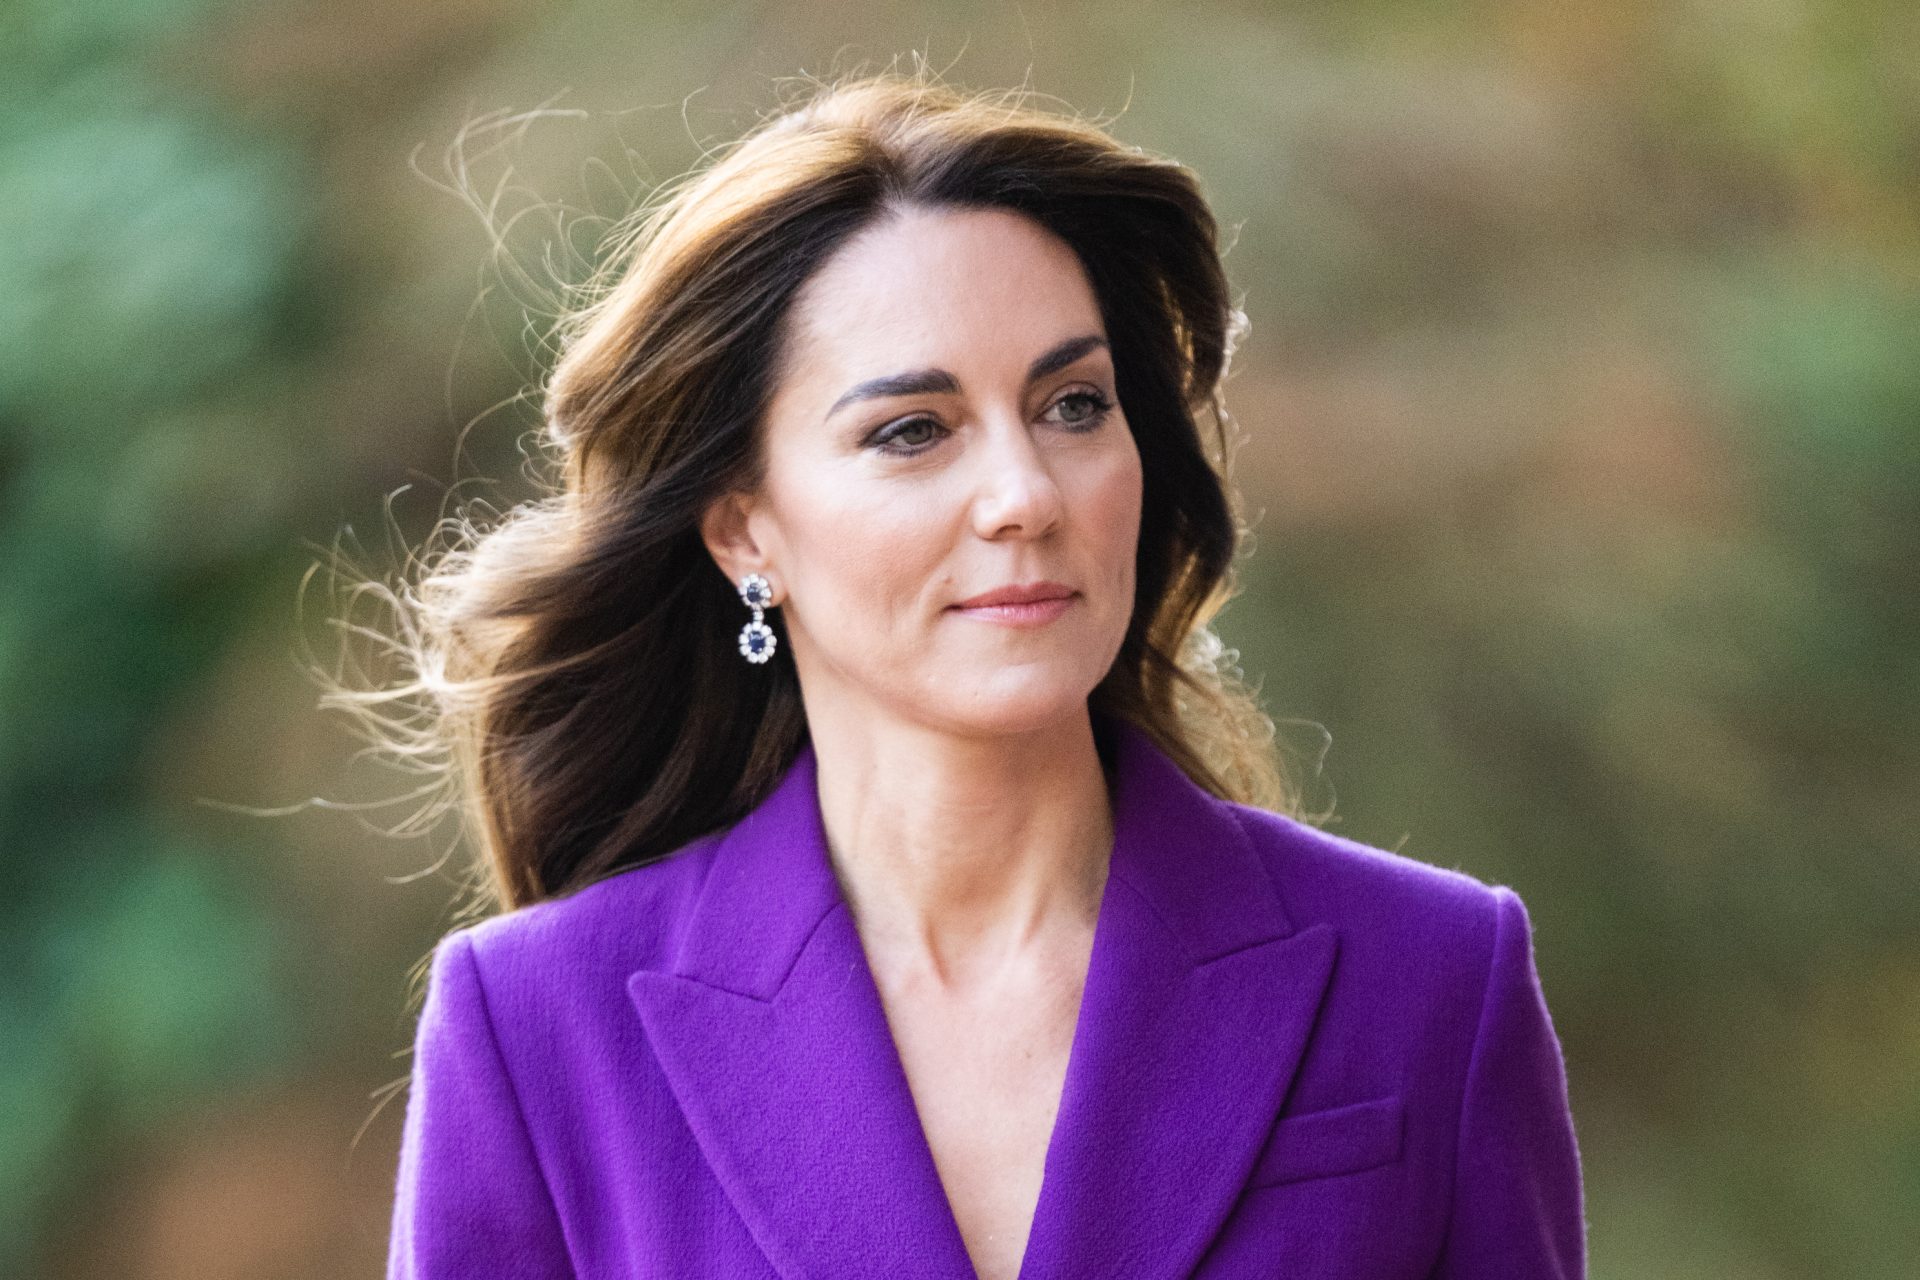 Catherine Middleton, Princess of Wales, announces she has cancer